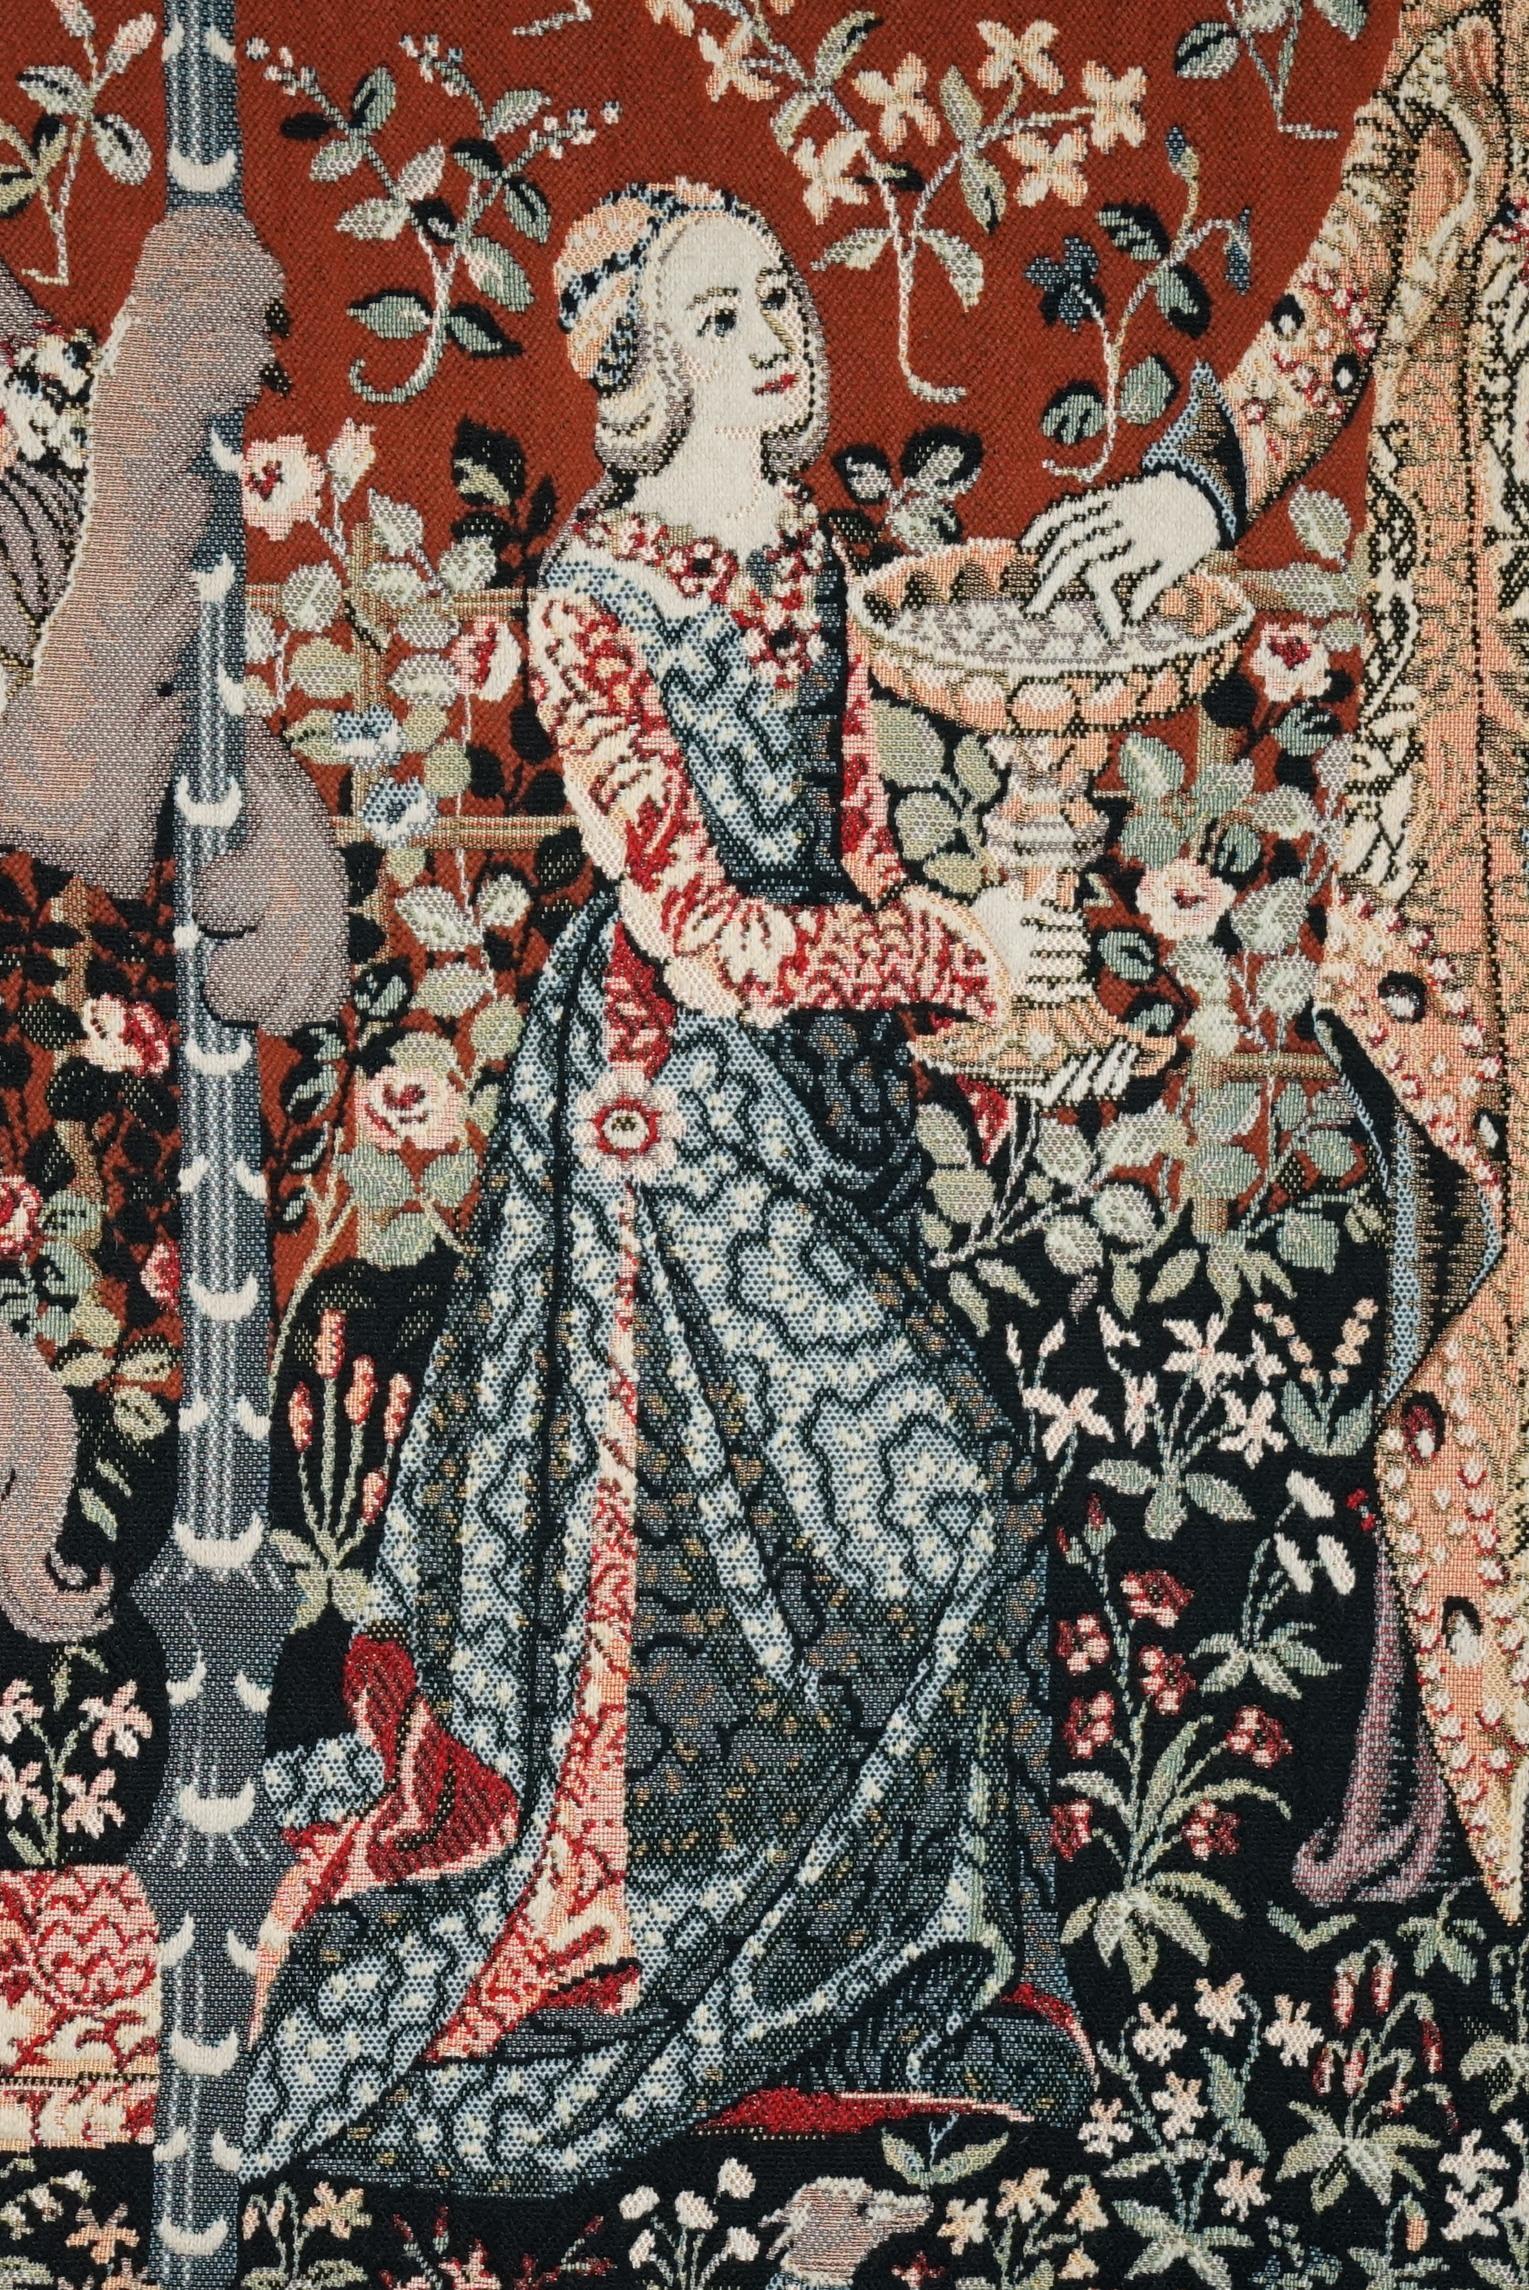 Embroidered ViNTAGE THE LADY AND THE UNICORN LARGE WALL HANGING WOVEN TAPESTRY 216CM X 189CM